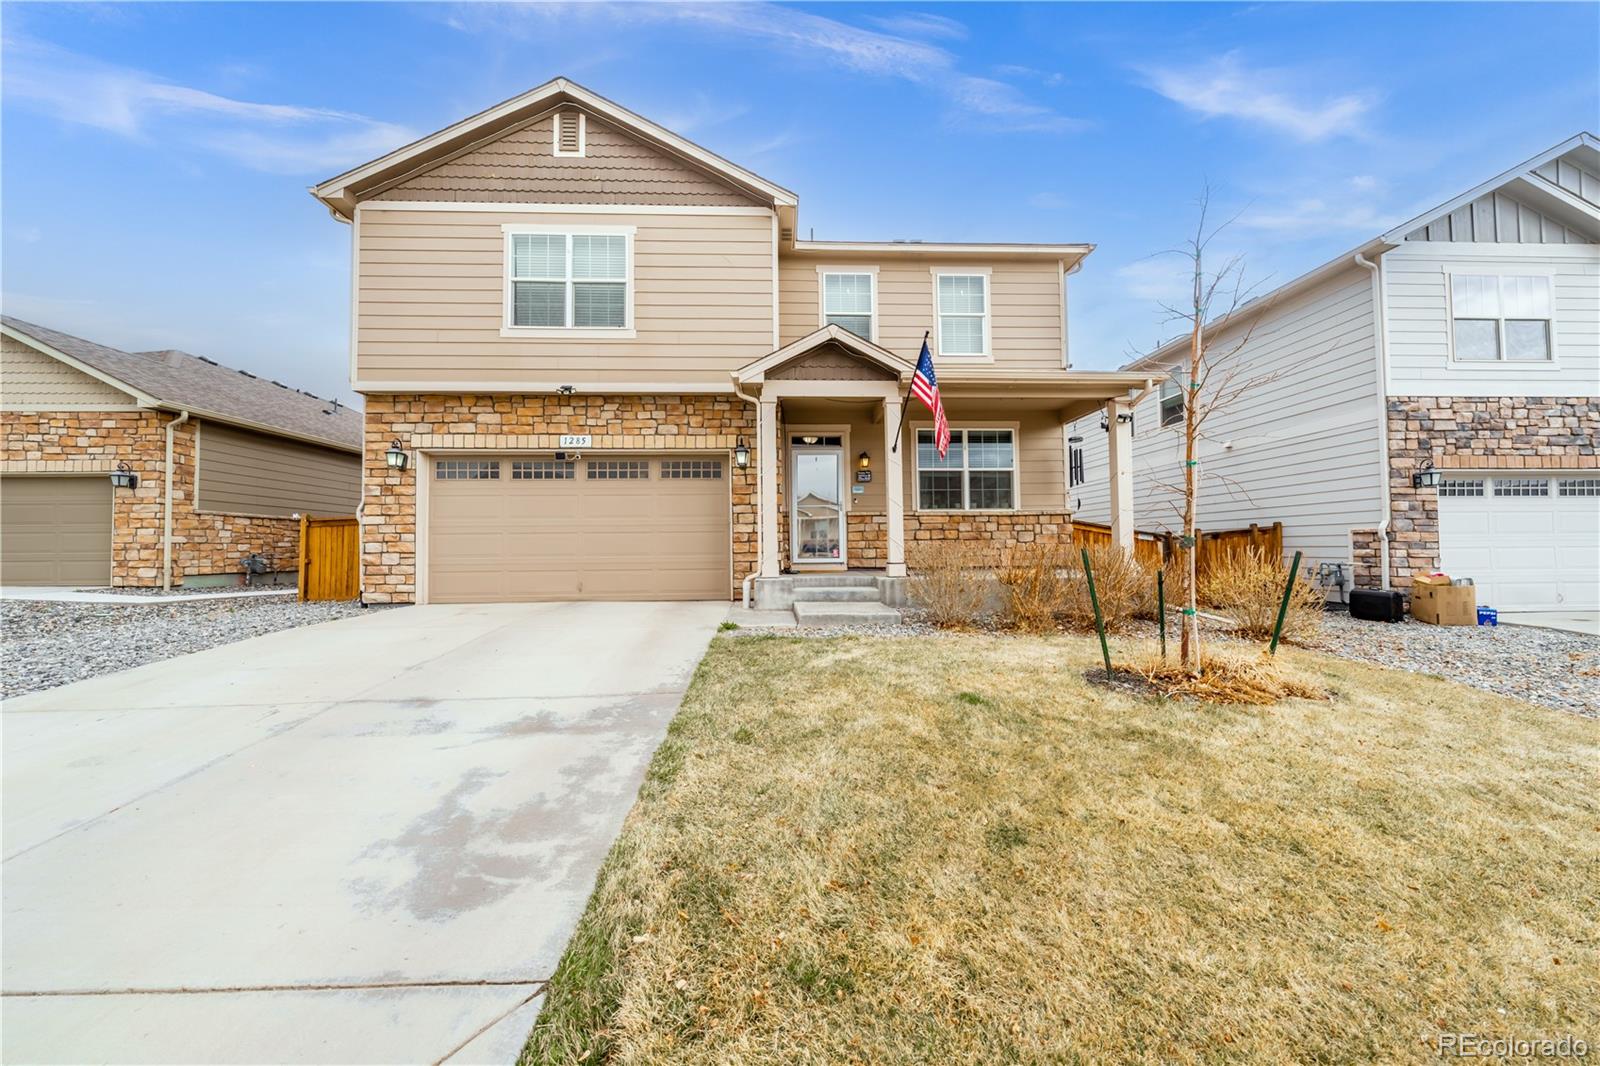 1285 W 170th Place, broomfield MLS: 3457373 Beds: 4 Baths: 3 Price: $699,000